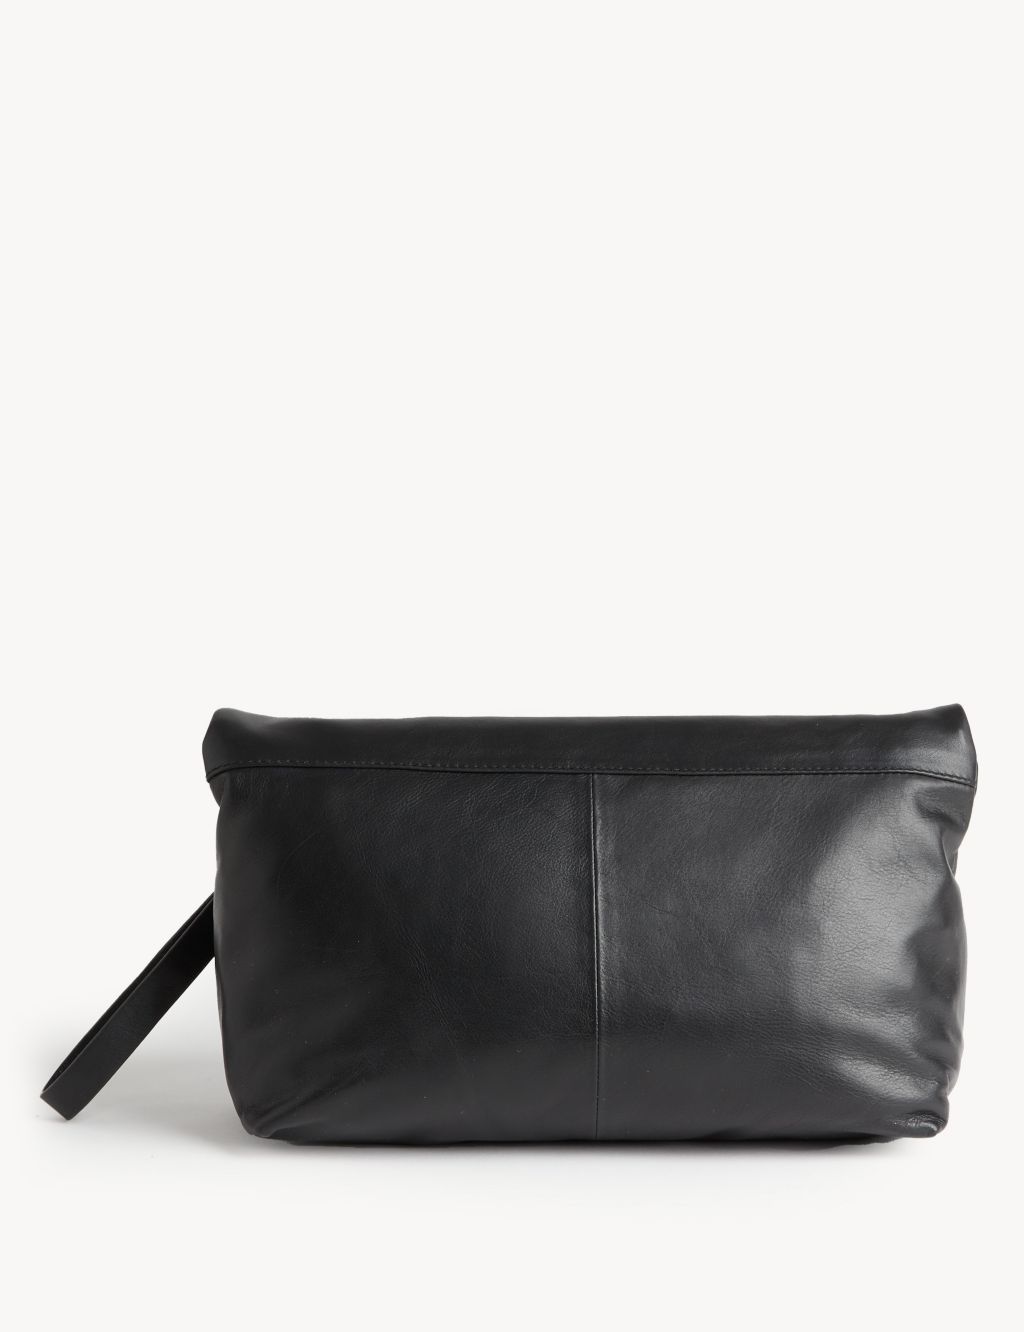 Leather Clutch Bag image 4